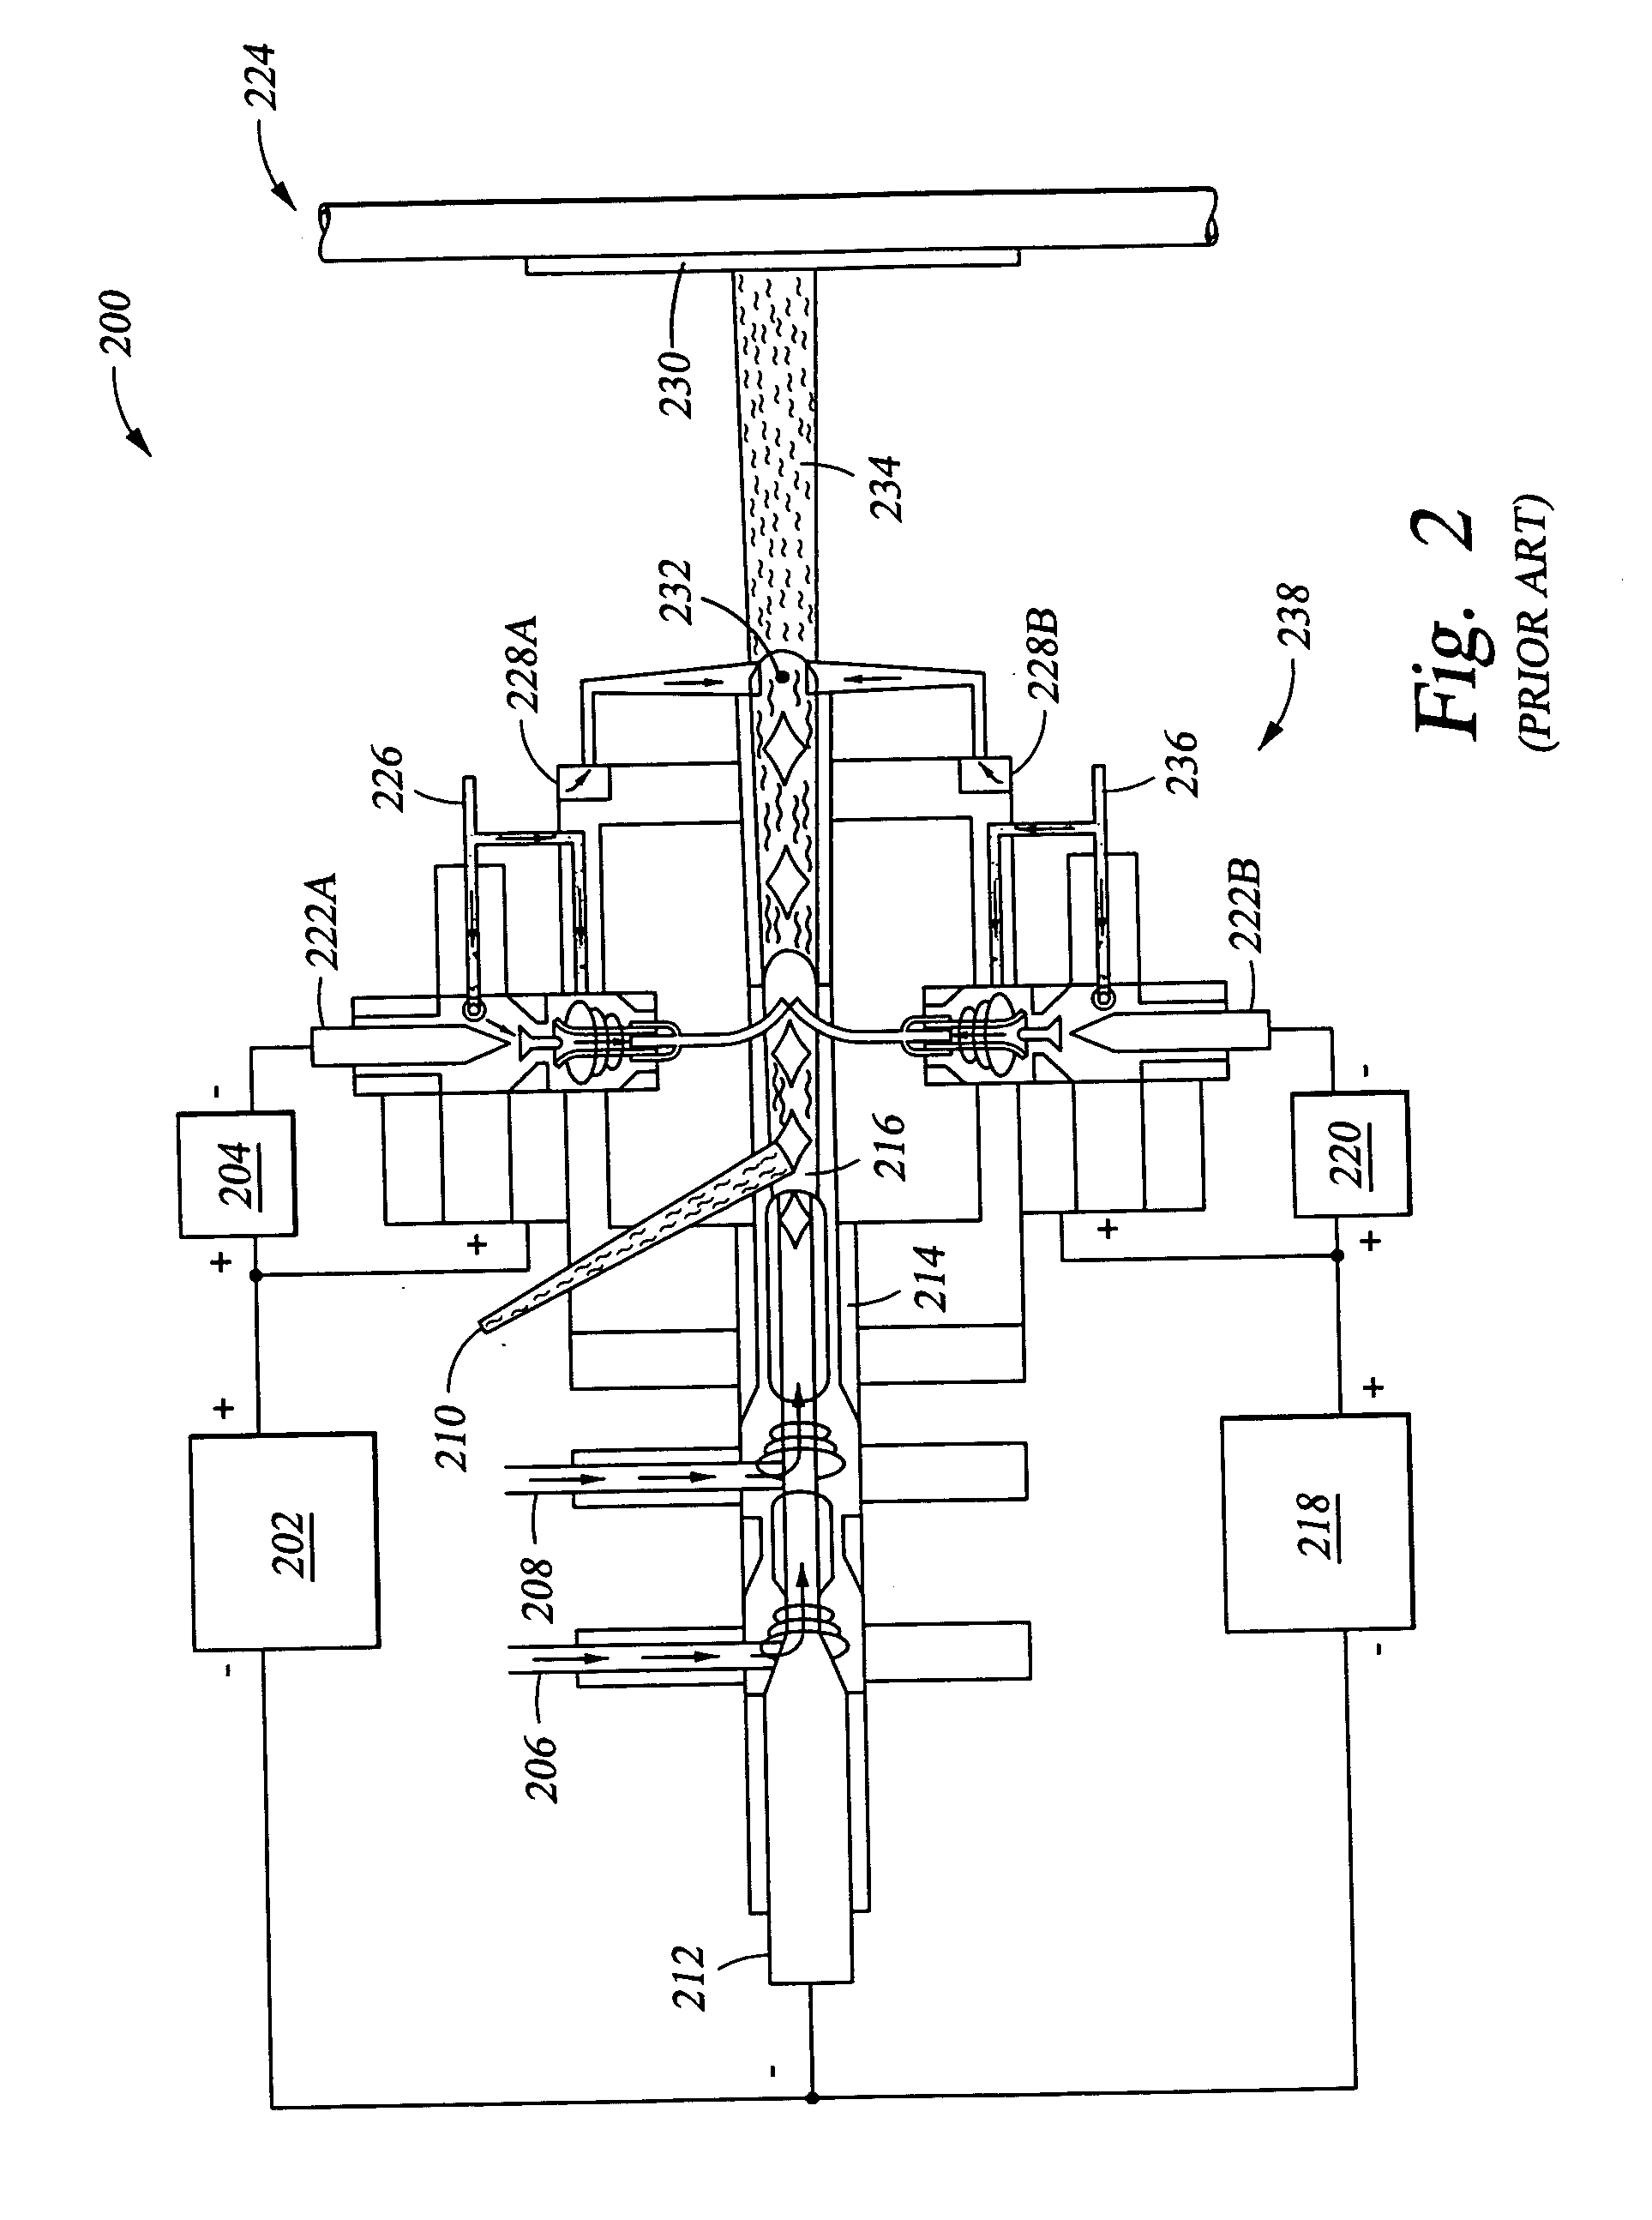 Cleaning method used in removing contaminants from the surface of an oxide or fluoride comprising a group III B metal